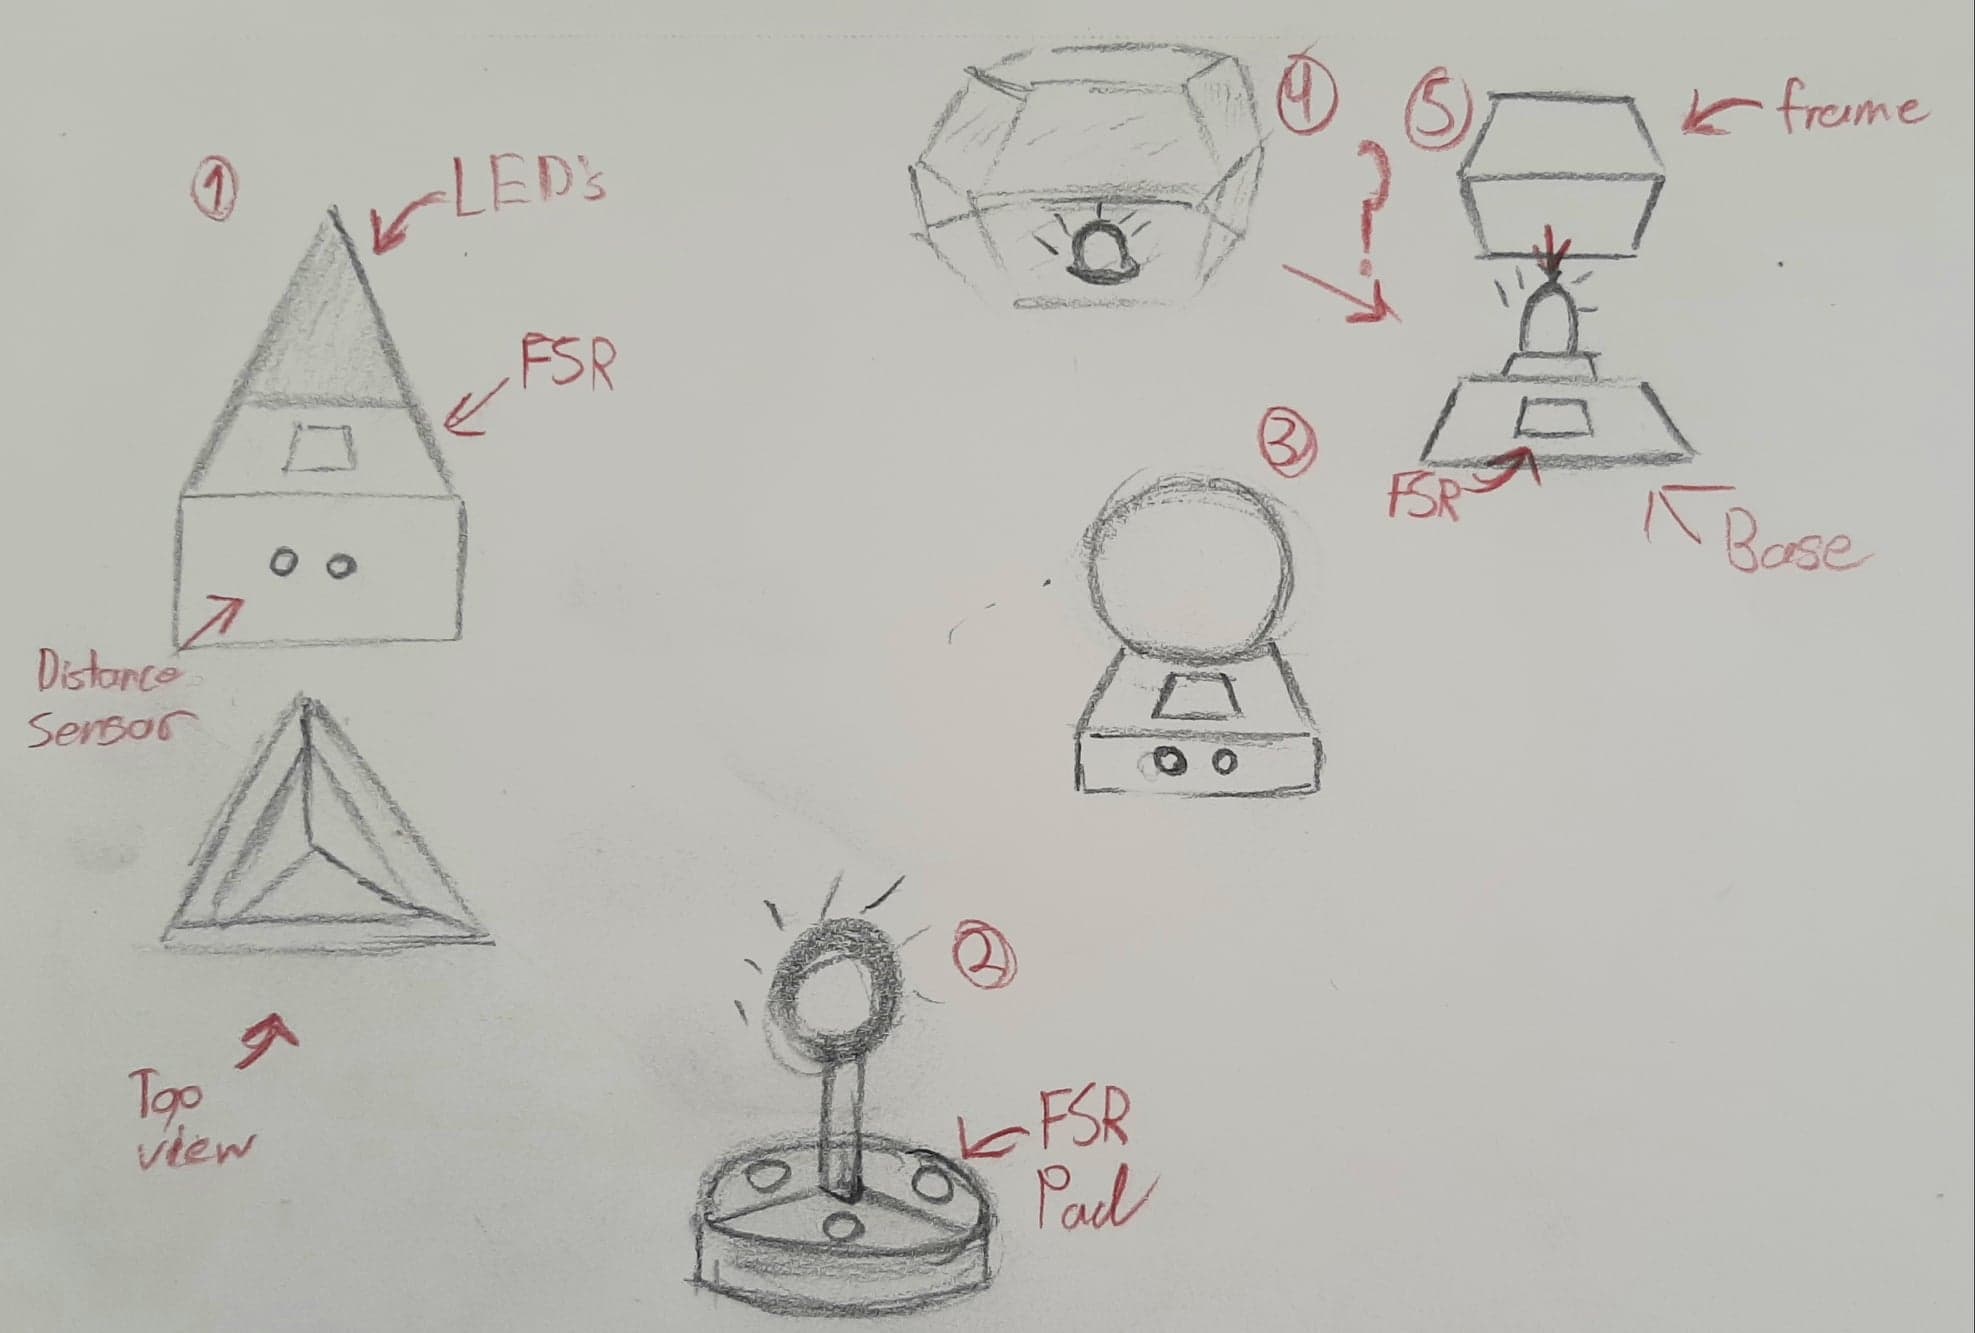 A sketch showing various forms imagined for the installation